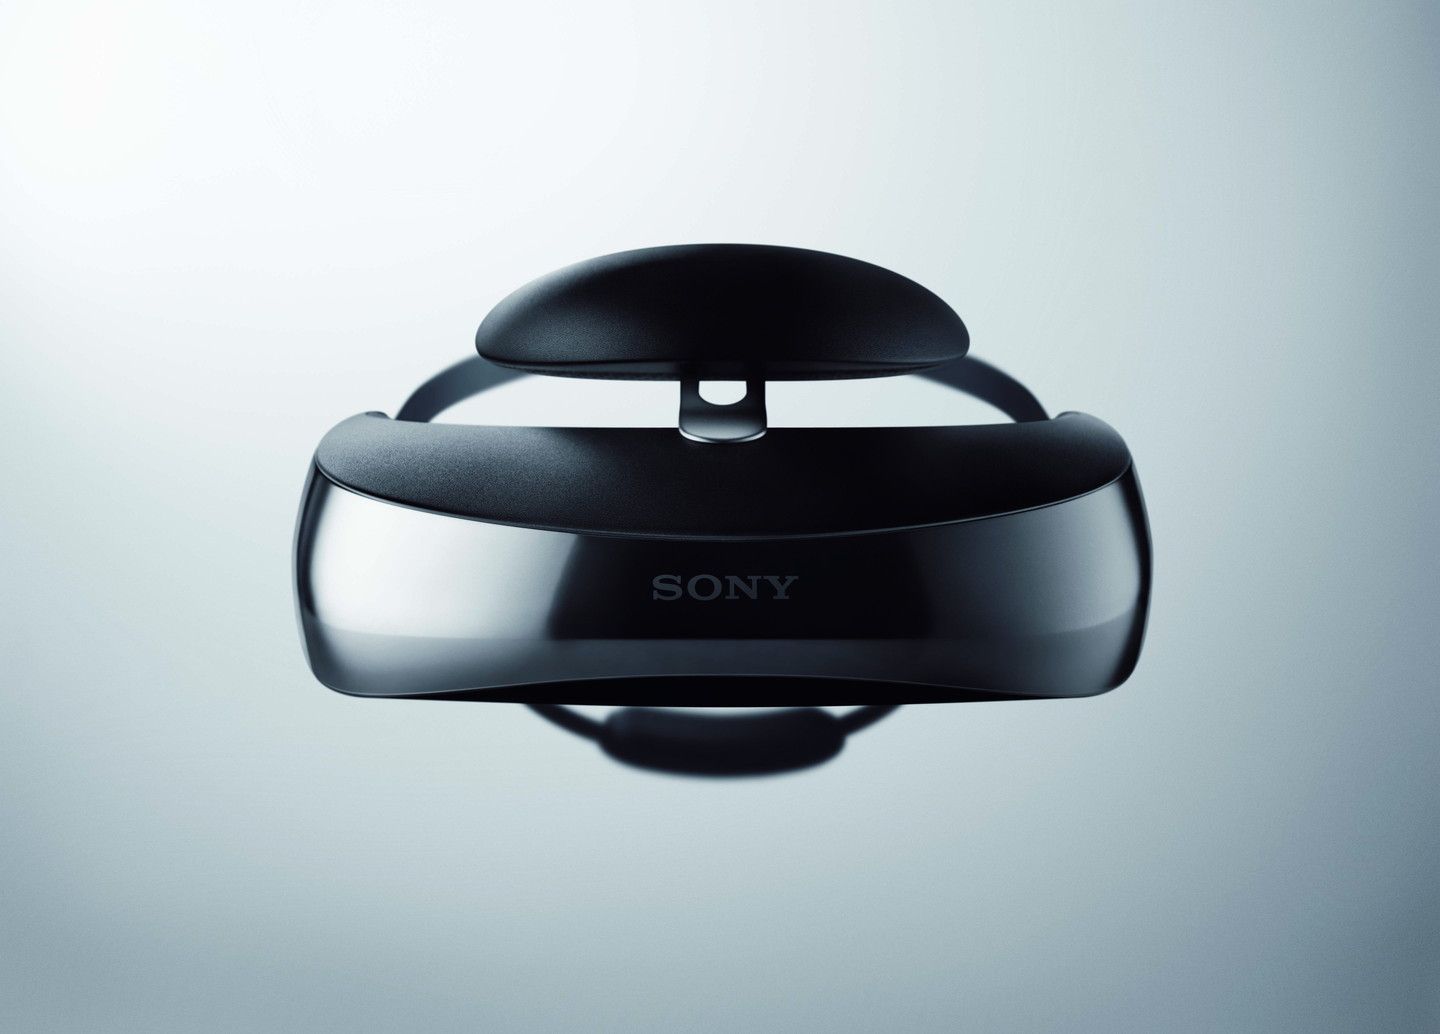 sony hmz t3w head mounted display brings 750 inch screen and 7 1 surround sound to your face wirelessly image 1